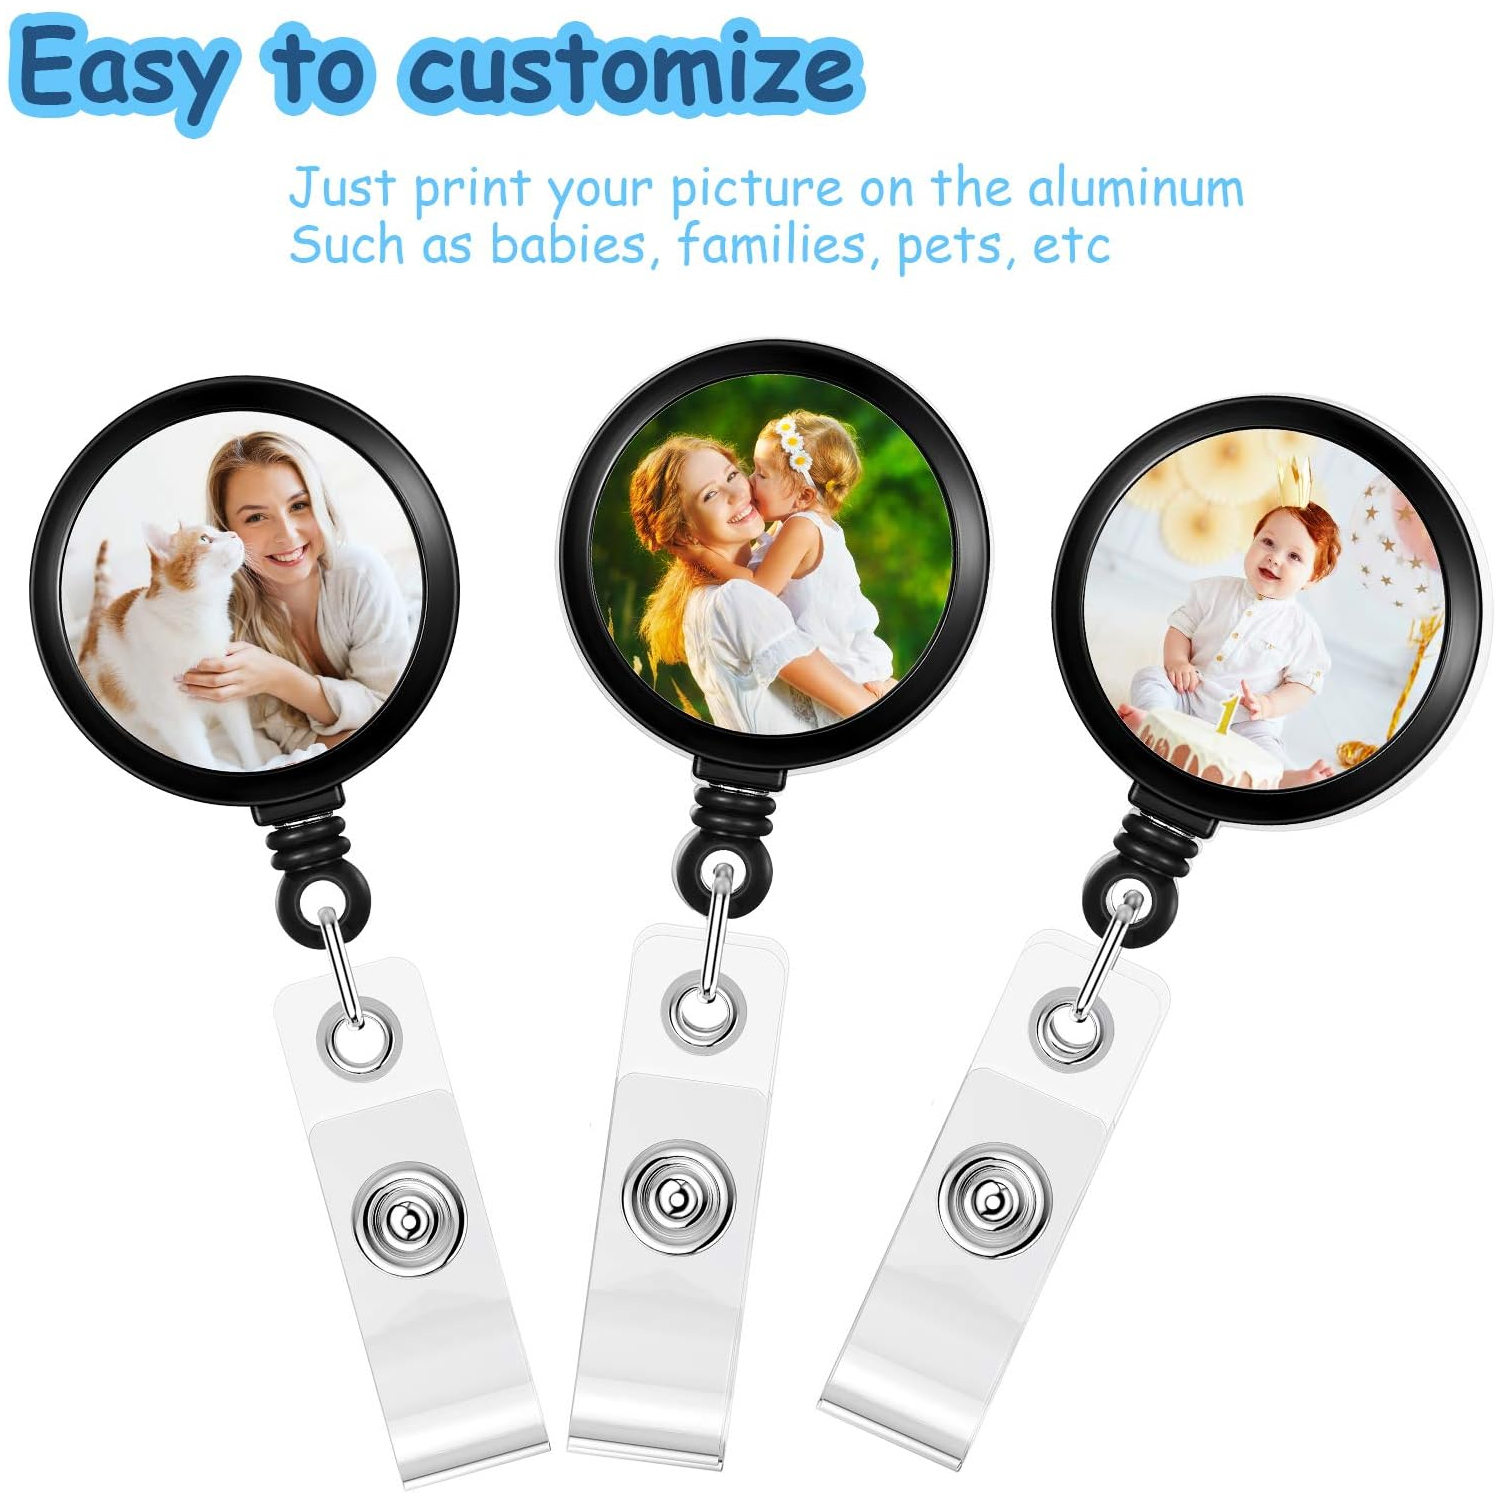 12 Pieces Sublimation Retractable Badge Holder with Belt Clip, Blank Nurse ID Badge Reels for Office Worker Doctor Nurse, Key Card Name Tag Holder for